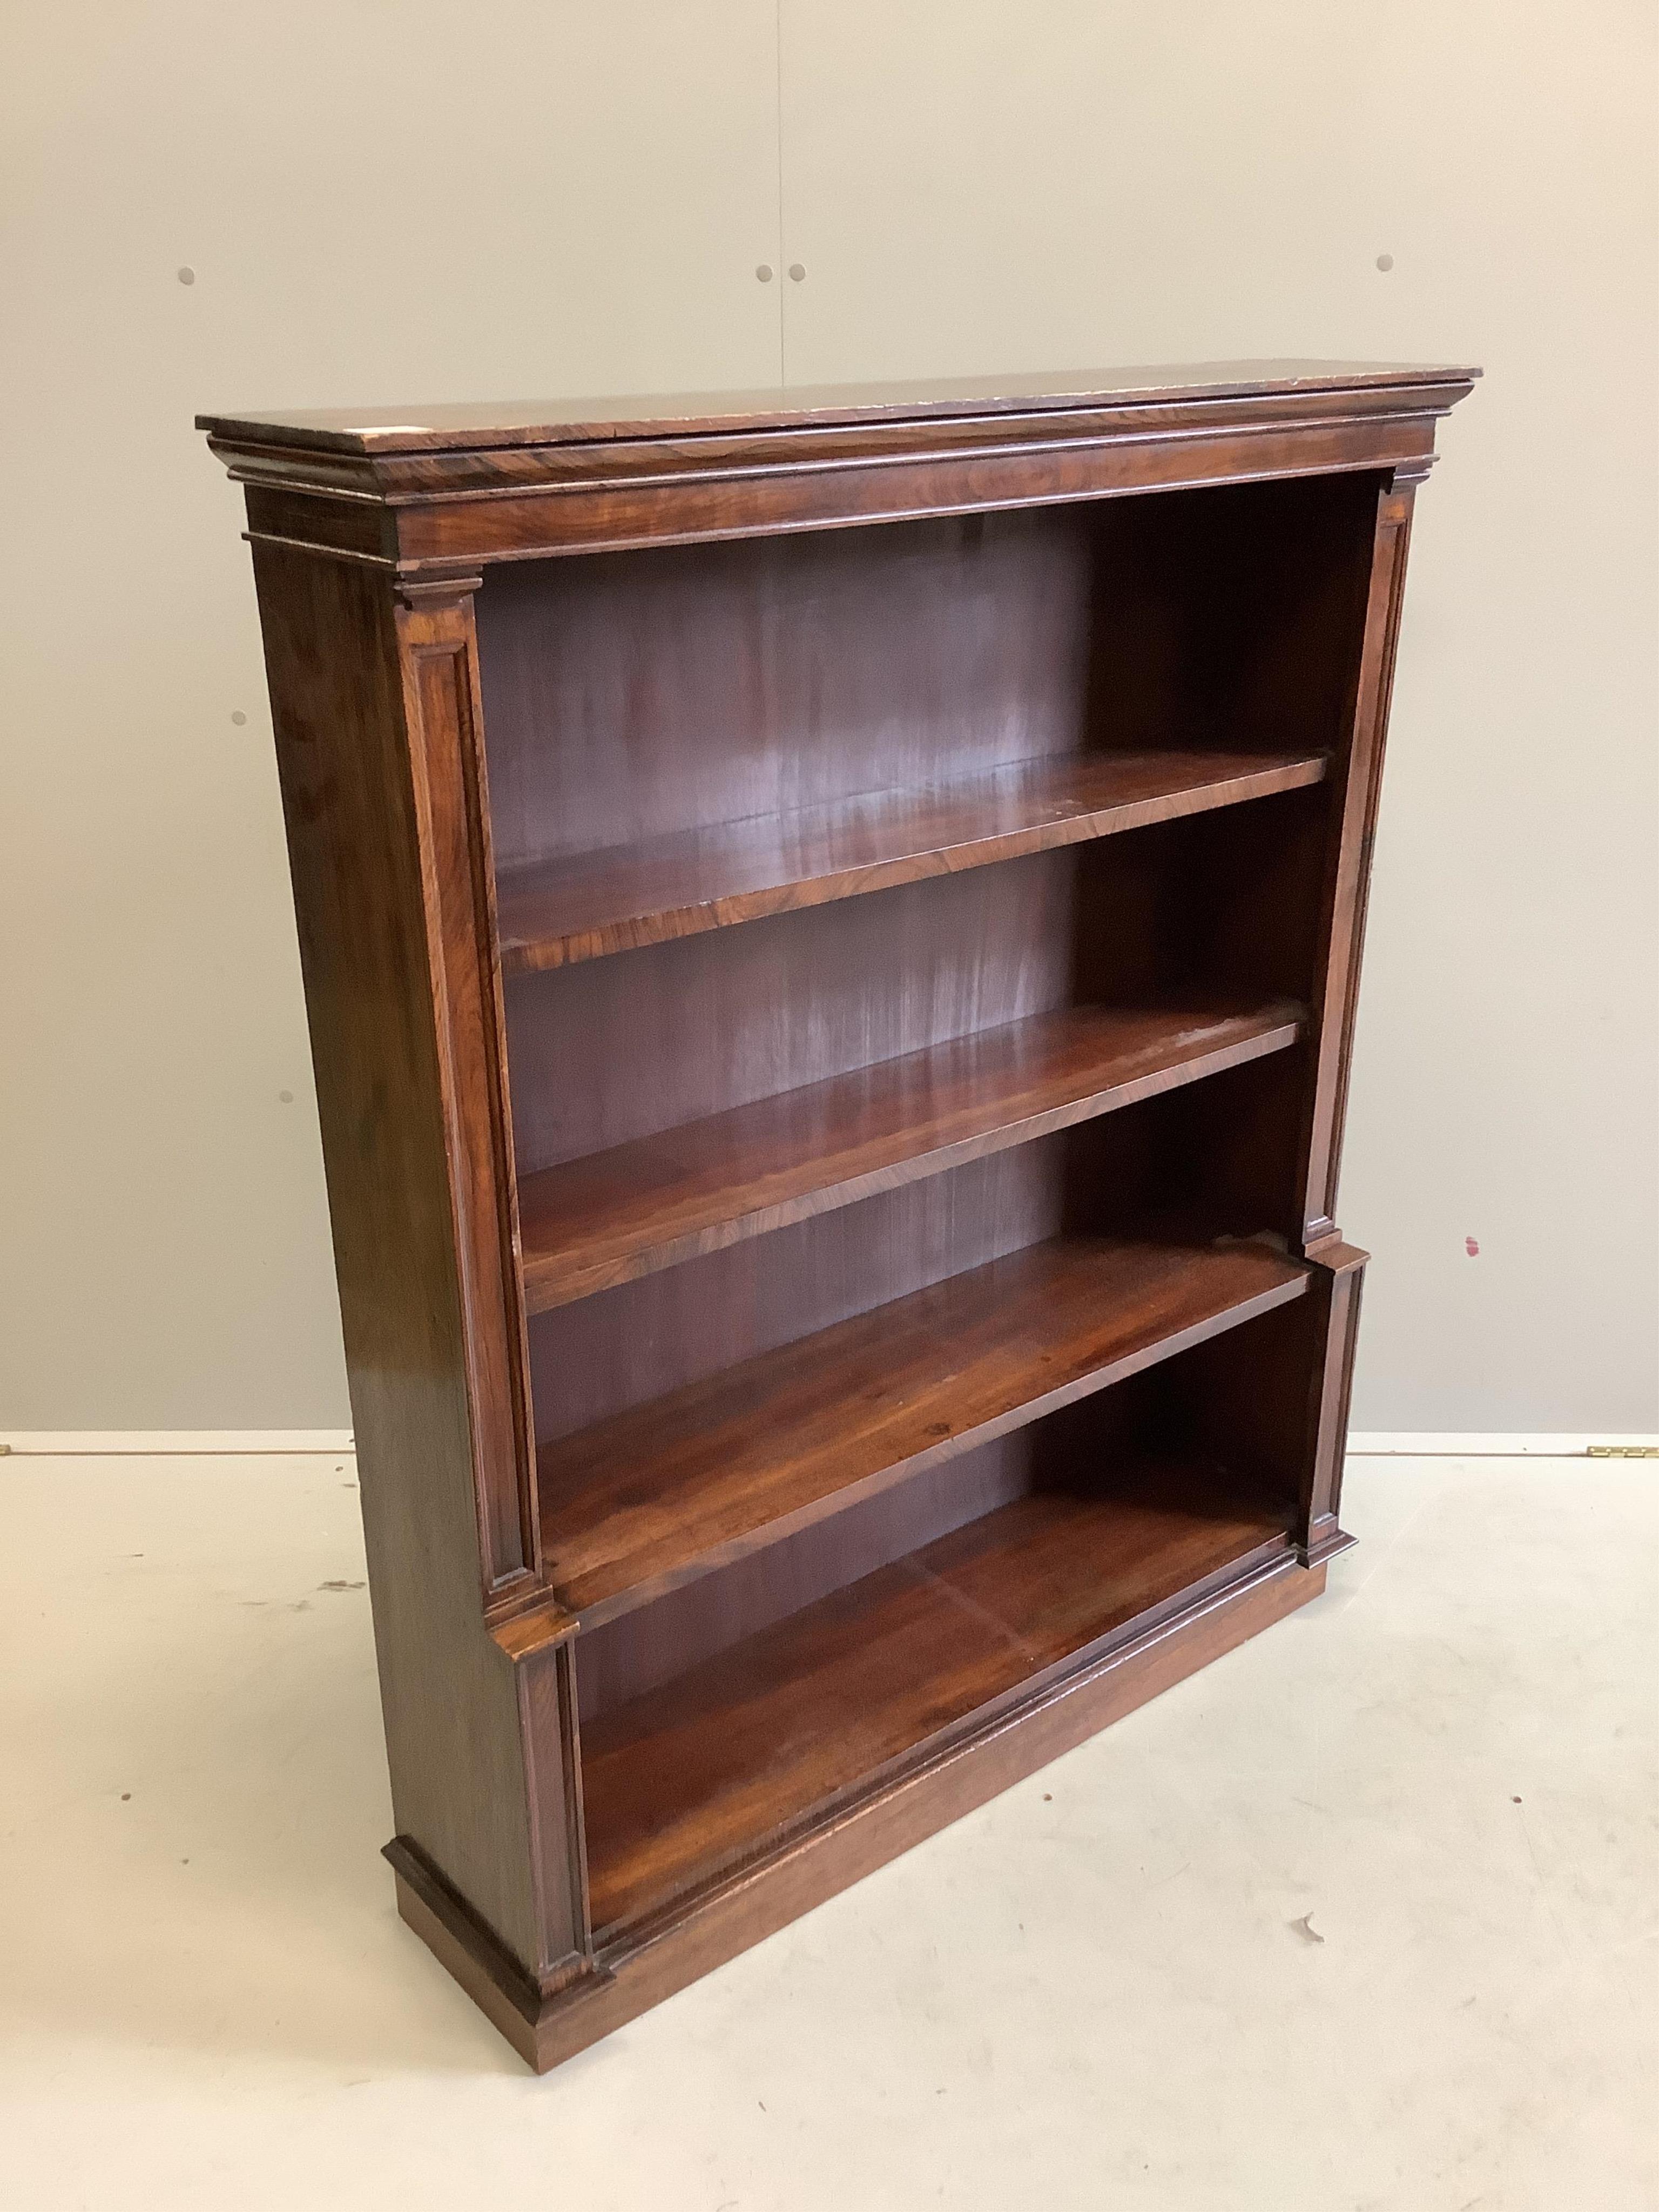 A Victorian simulated rosewood bookcase, width 104cm, depth 24cm, height 124cm. Condition - fair